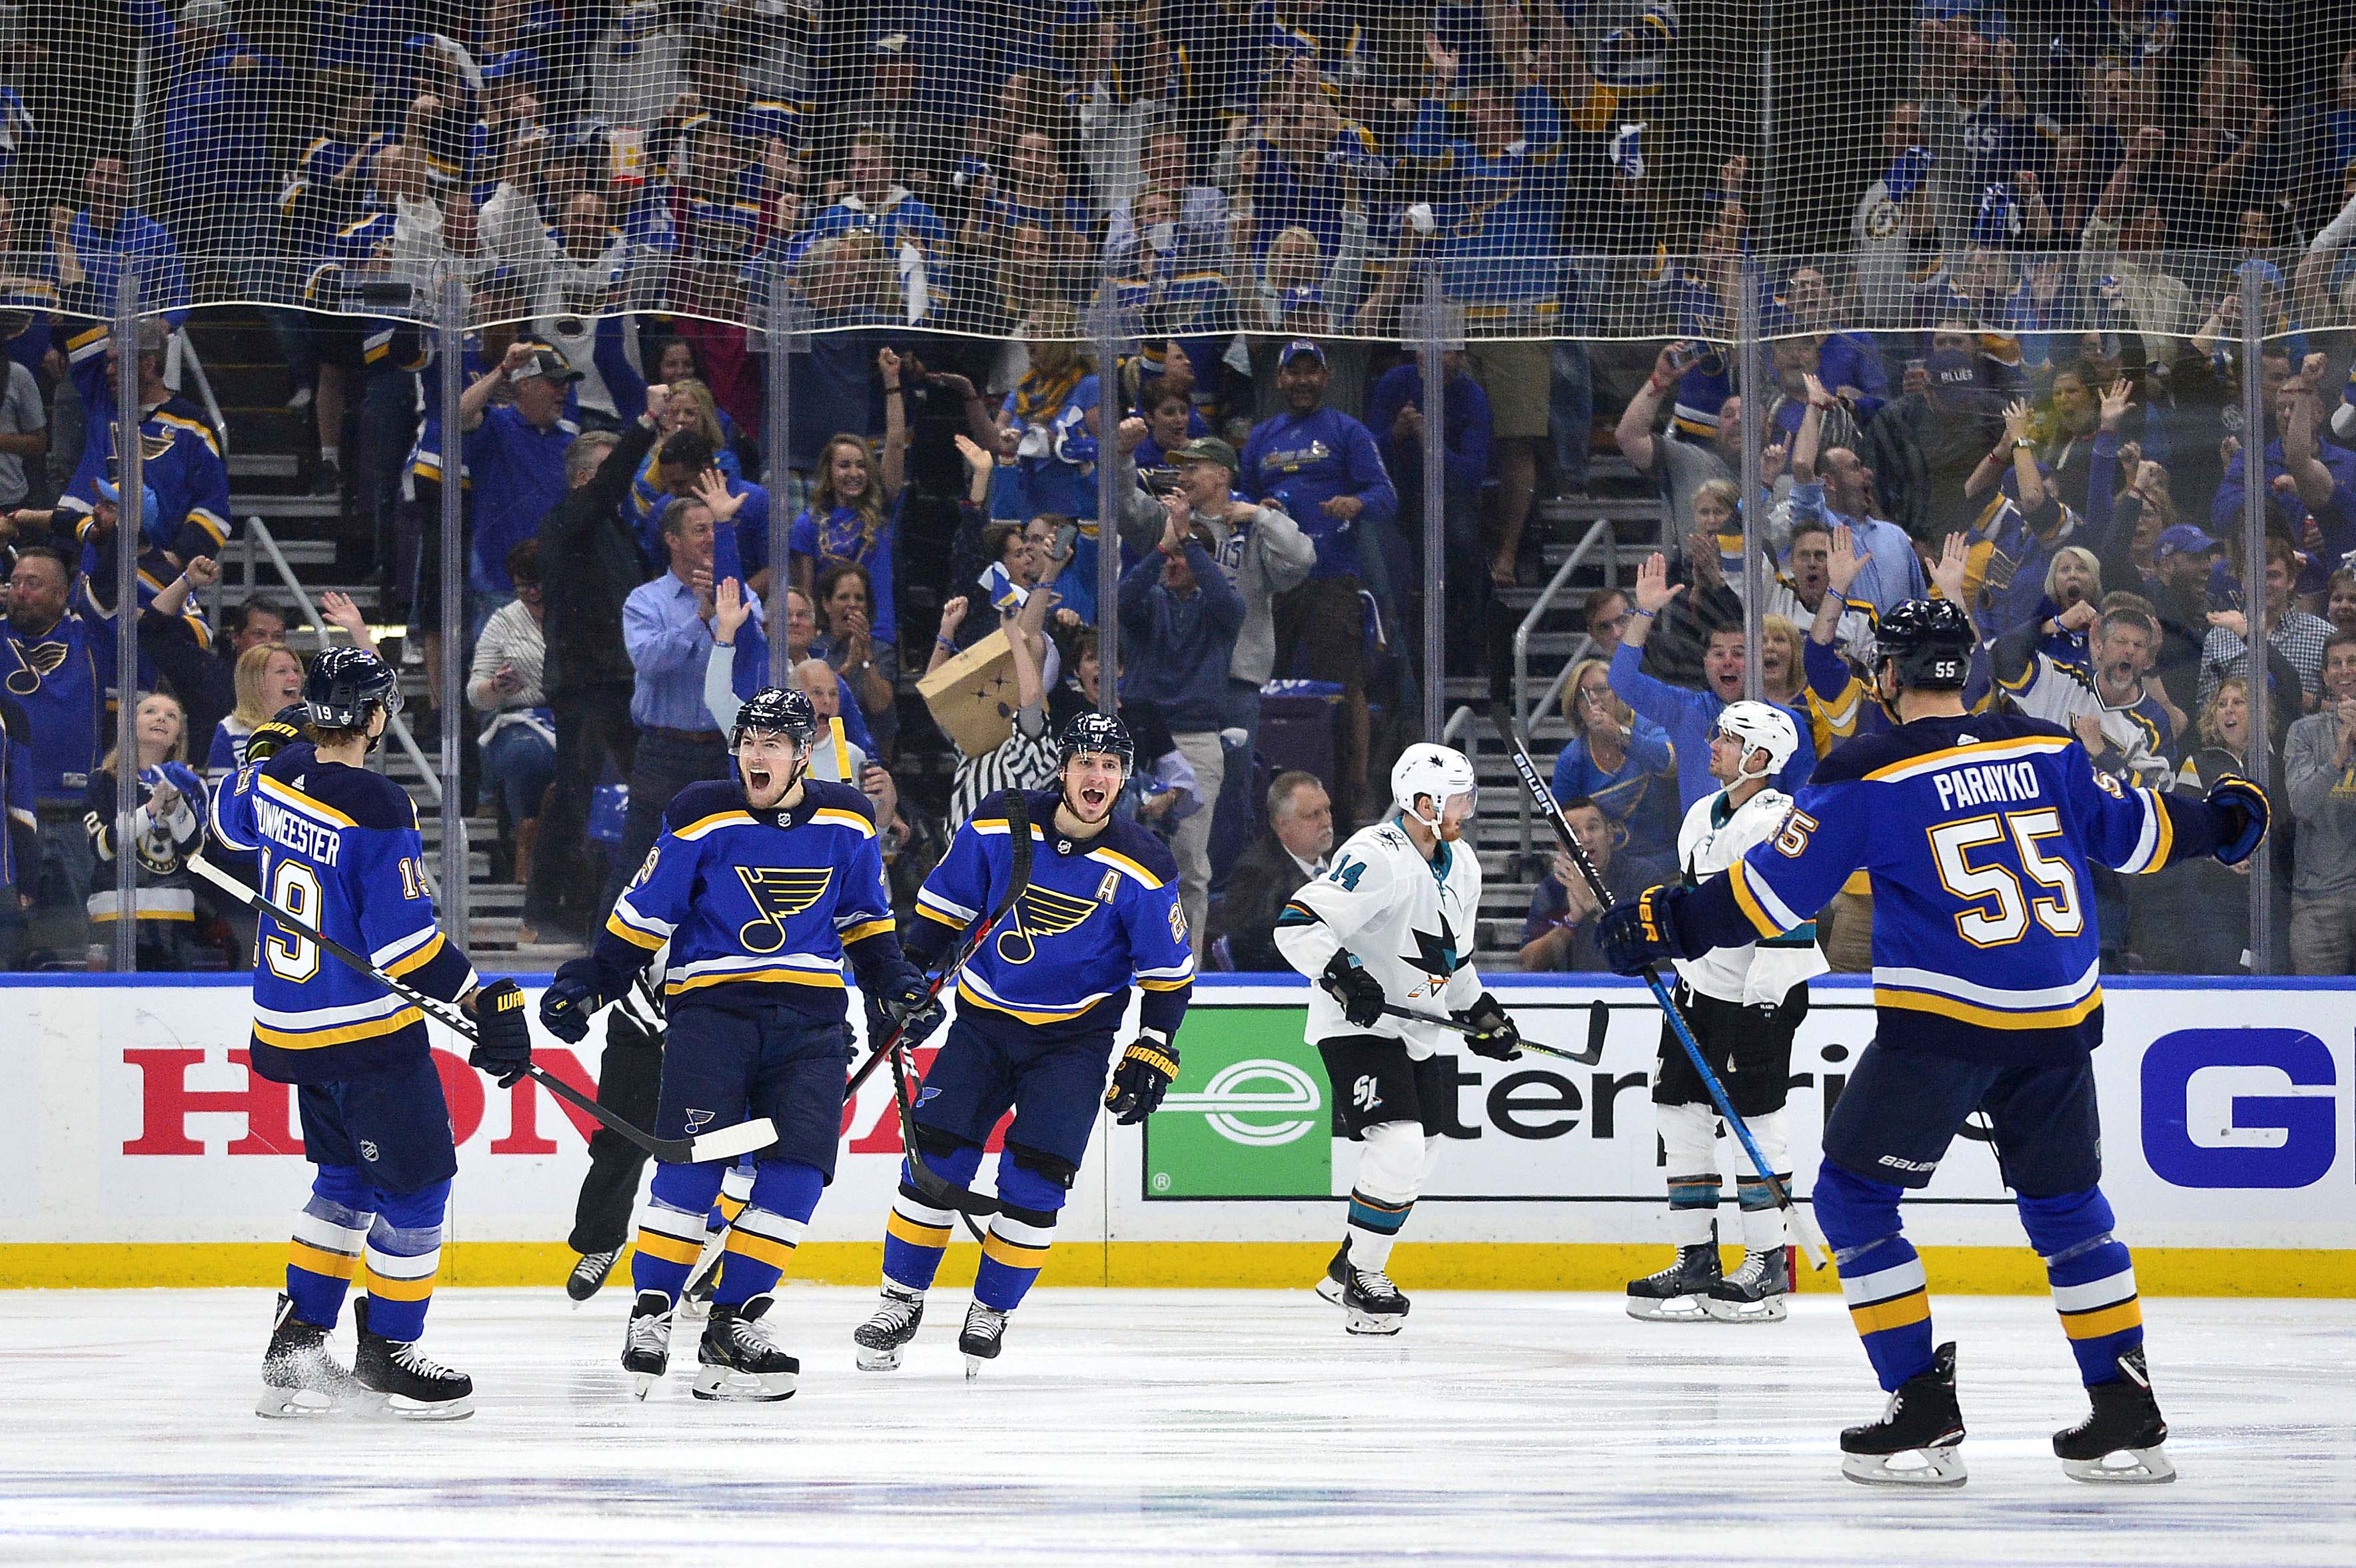 St. Louis Blues center Ivan Barbashev (49) is congratulated by teammates after scoring during the first period in game four of the Western Conference Final of the 2019 Stanley Cup Playoffs against the San Jose Sharks at Enterprise Center.